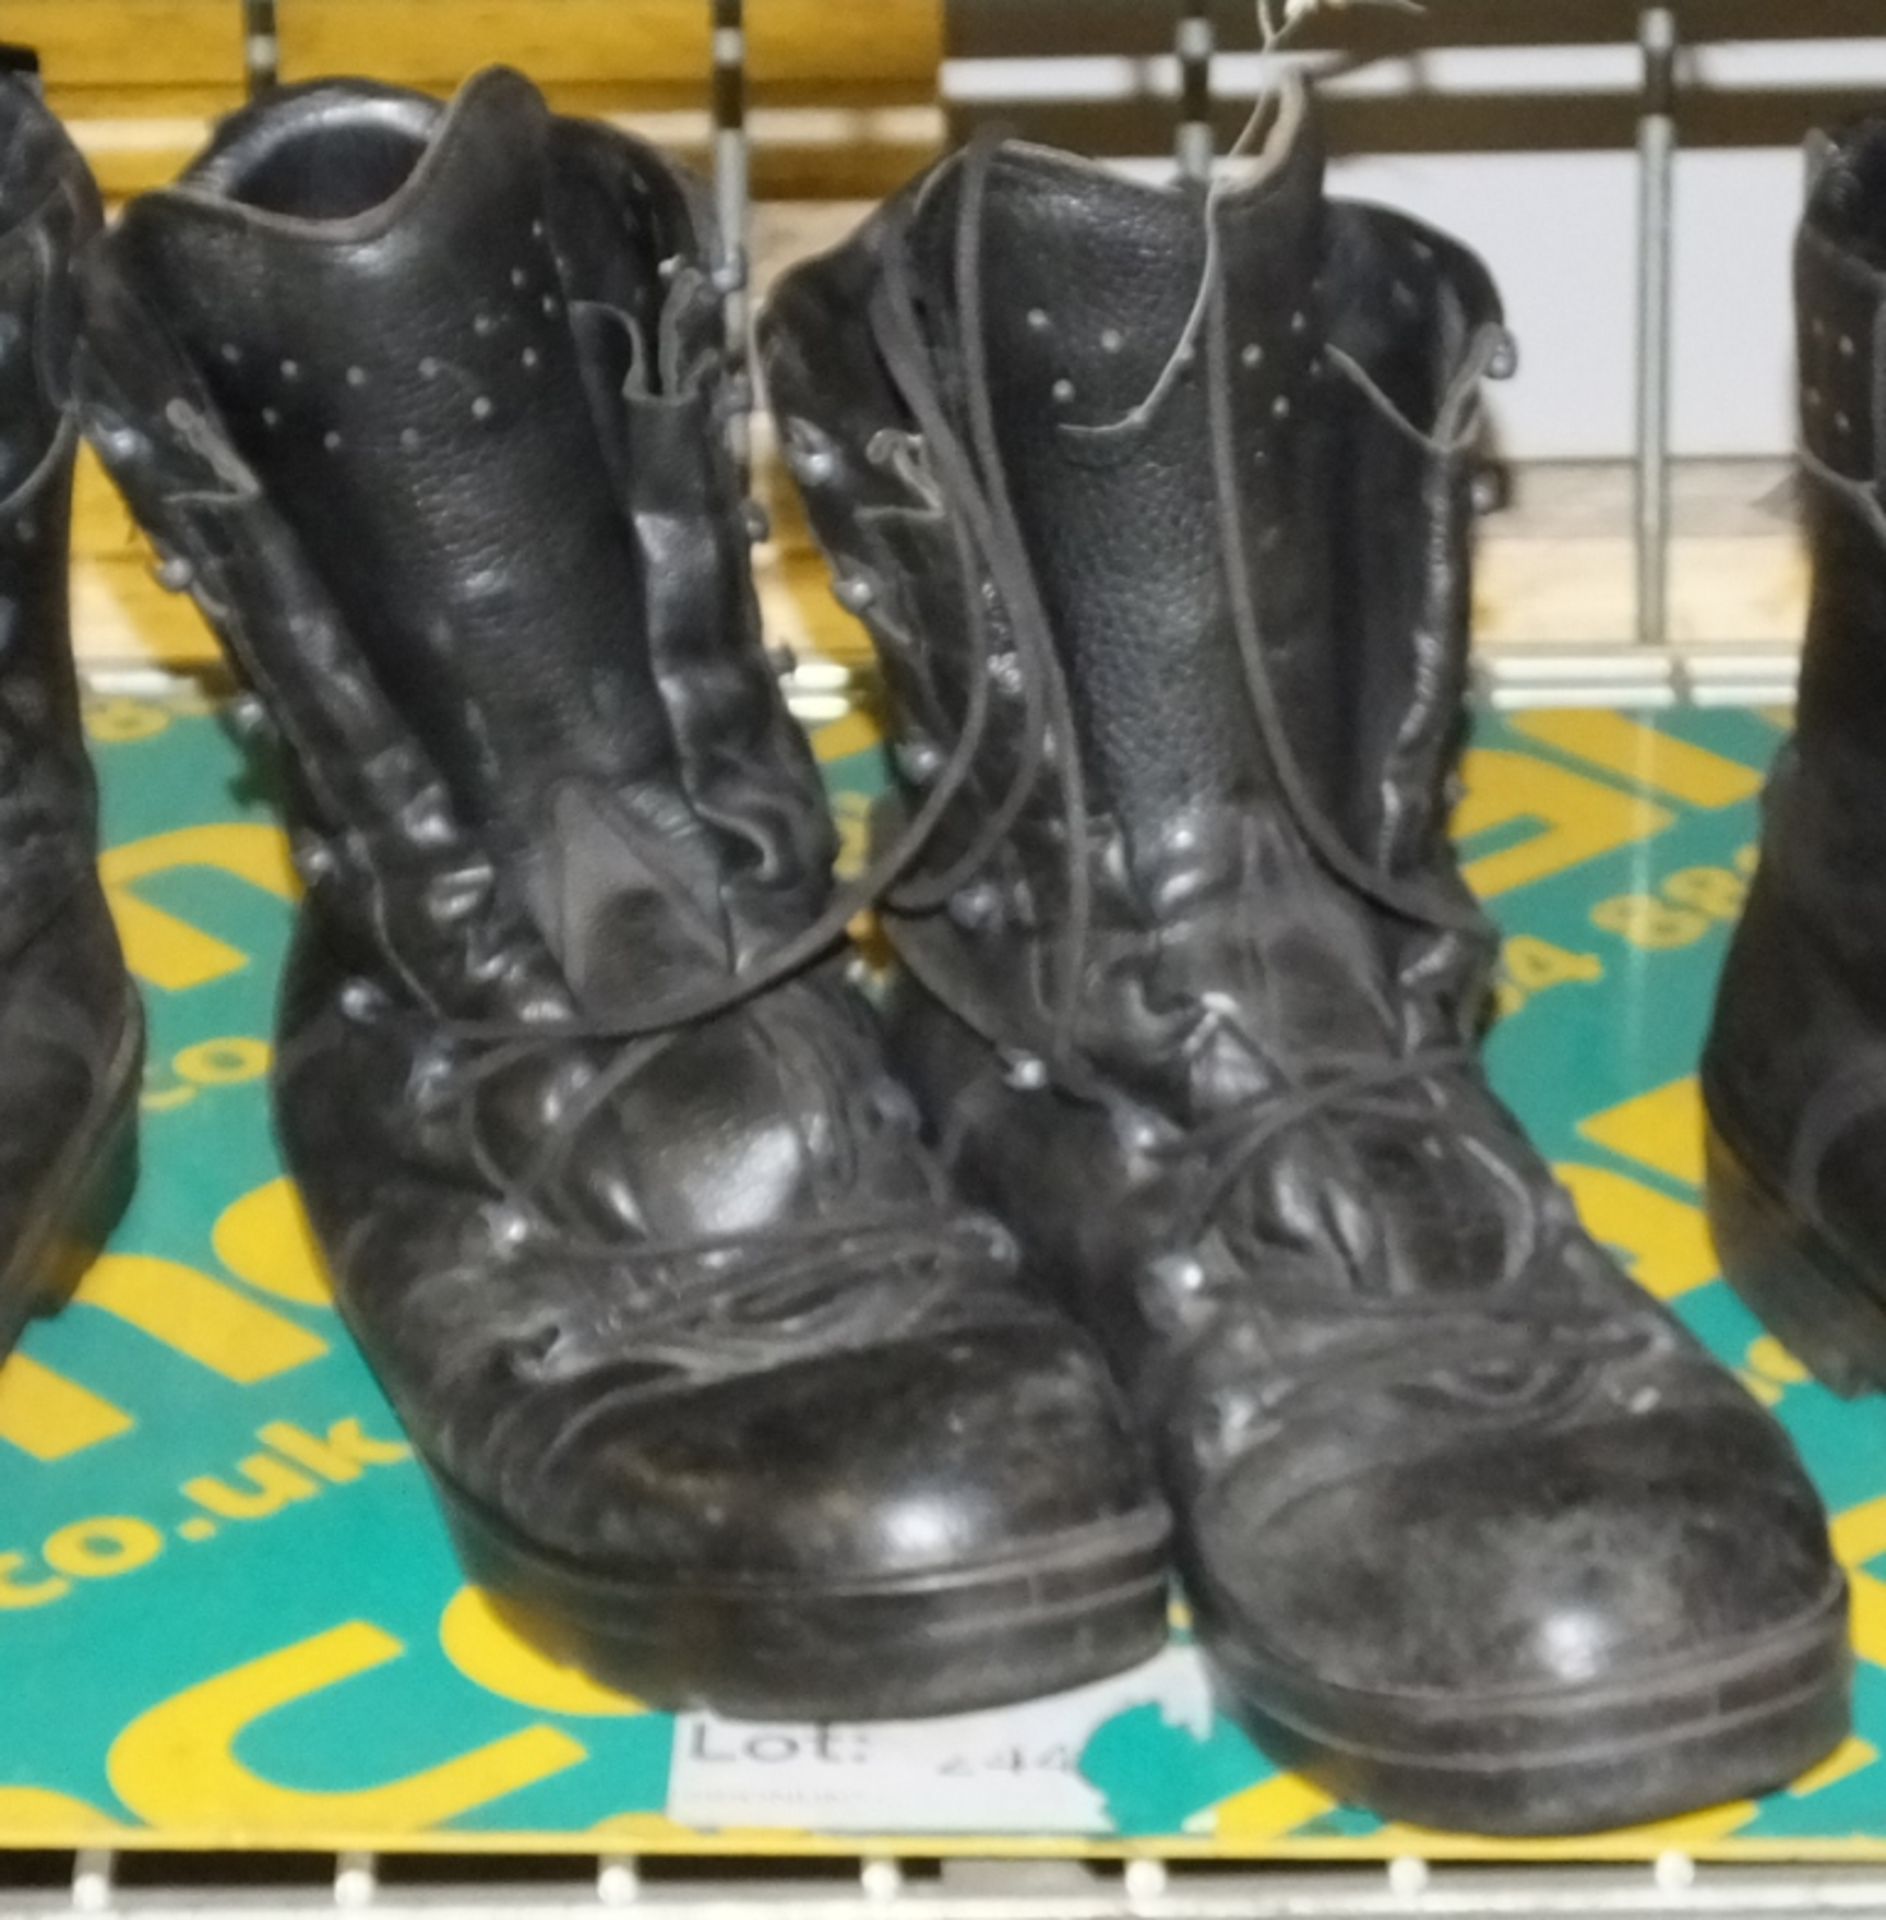 3x Heavy duty boots - German Para - unknown sizes - Image 3 of 4